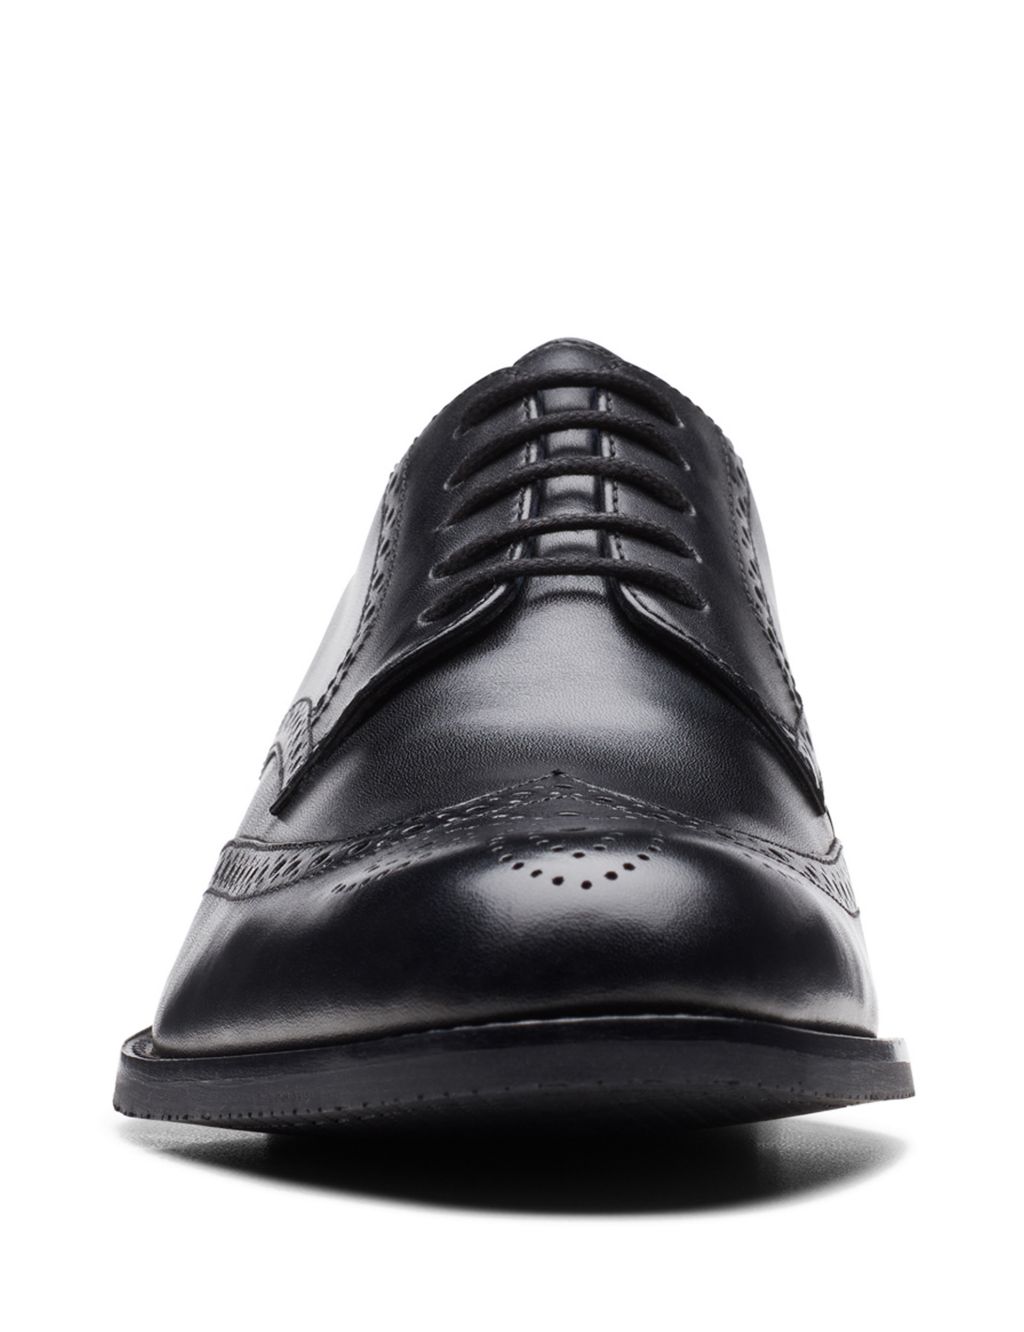 Leather Brogues image 3